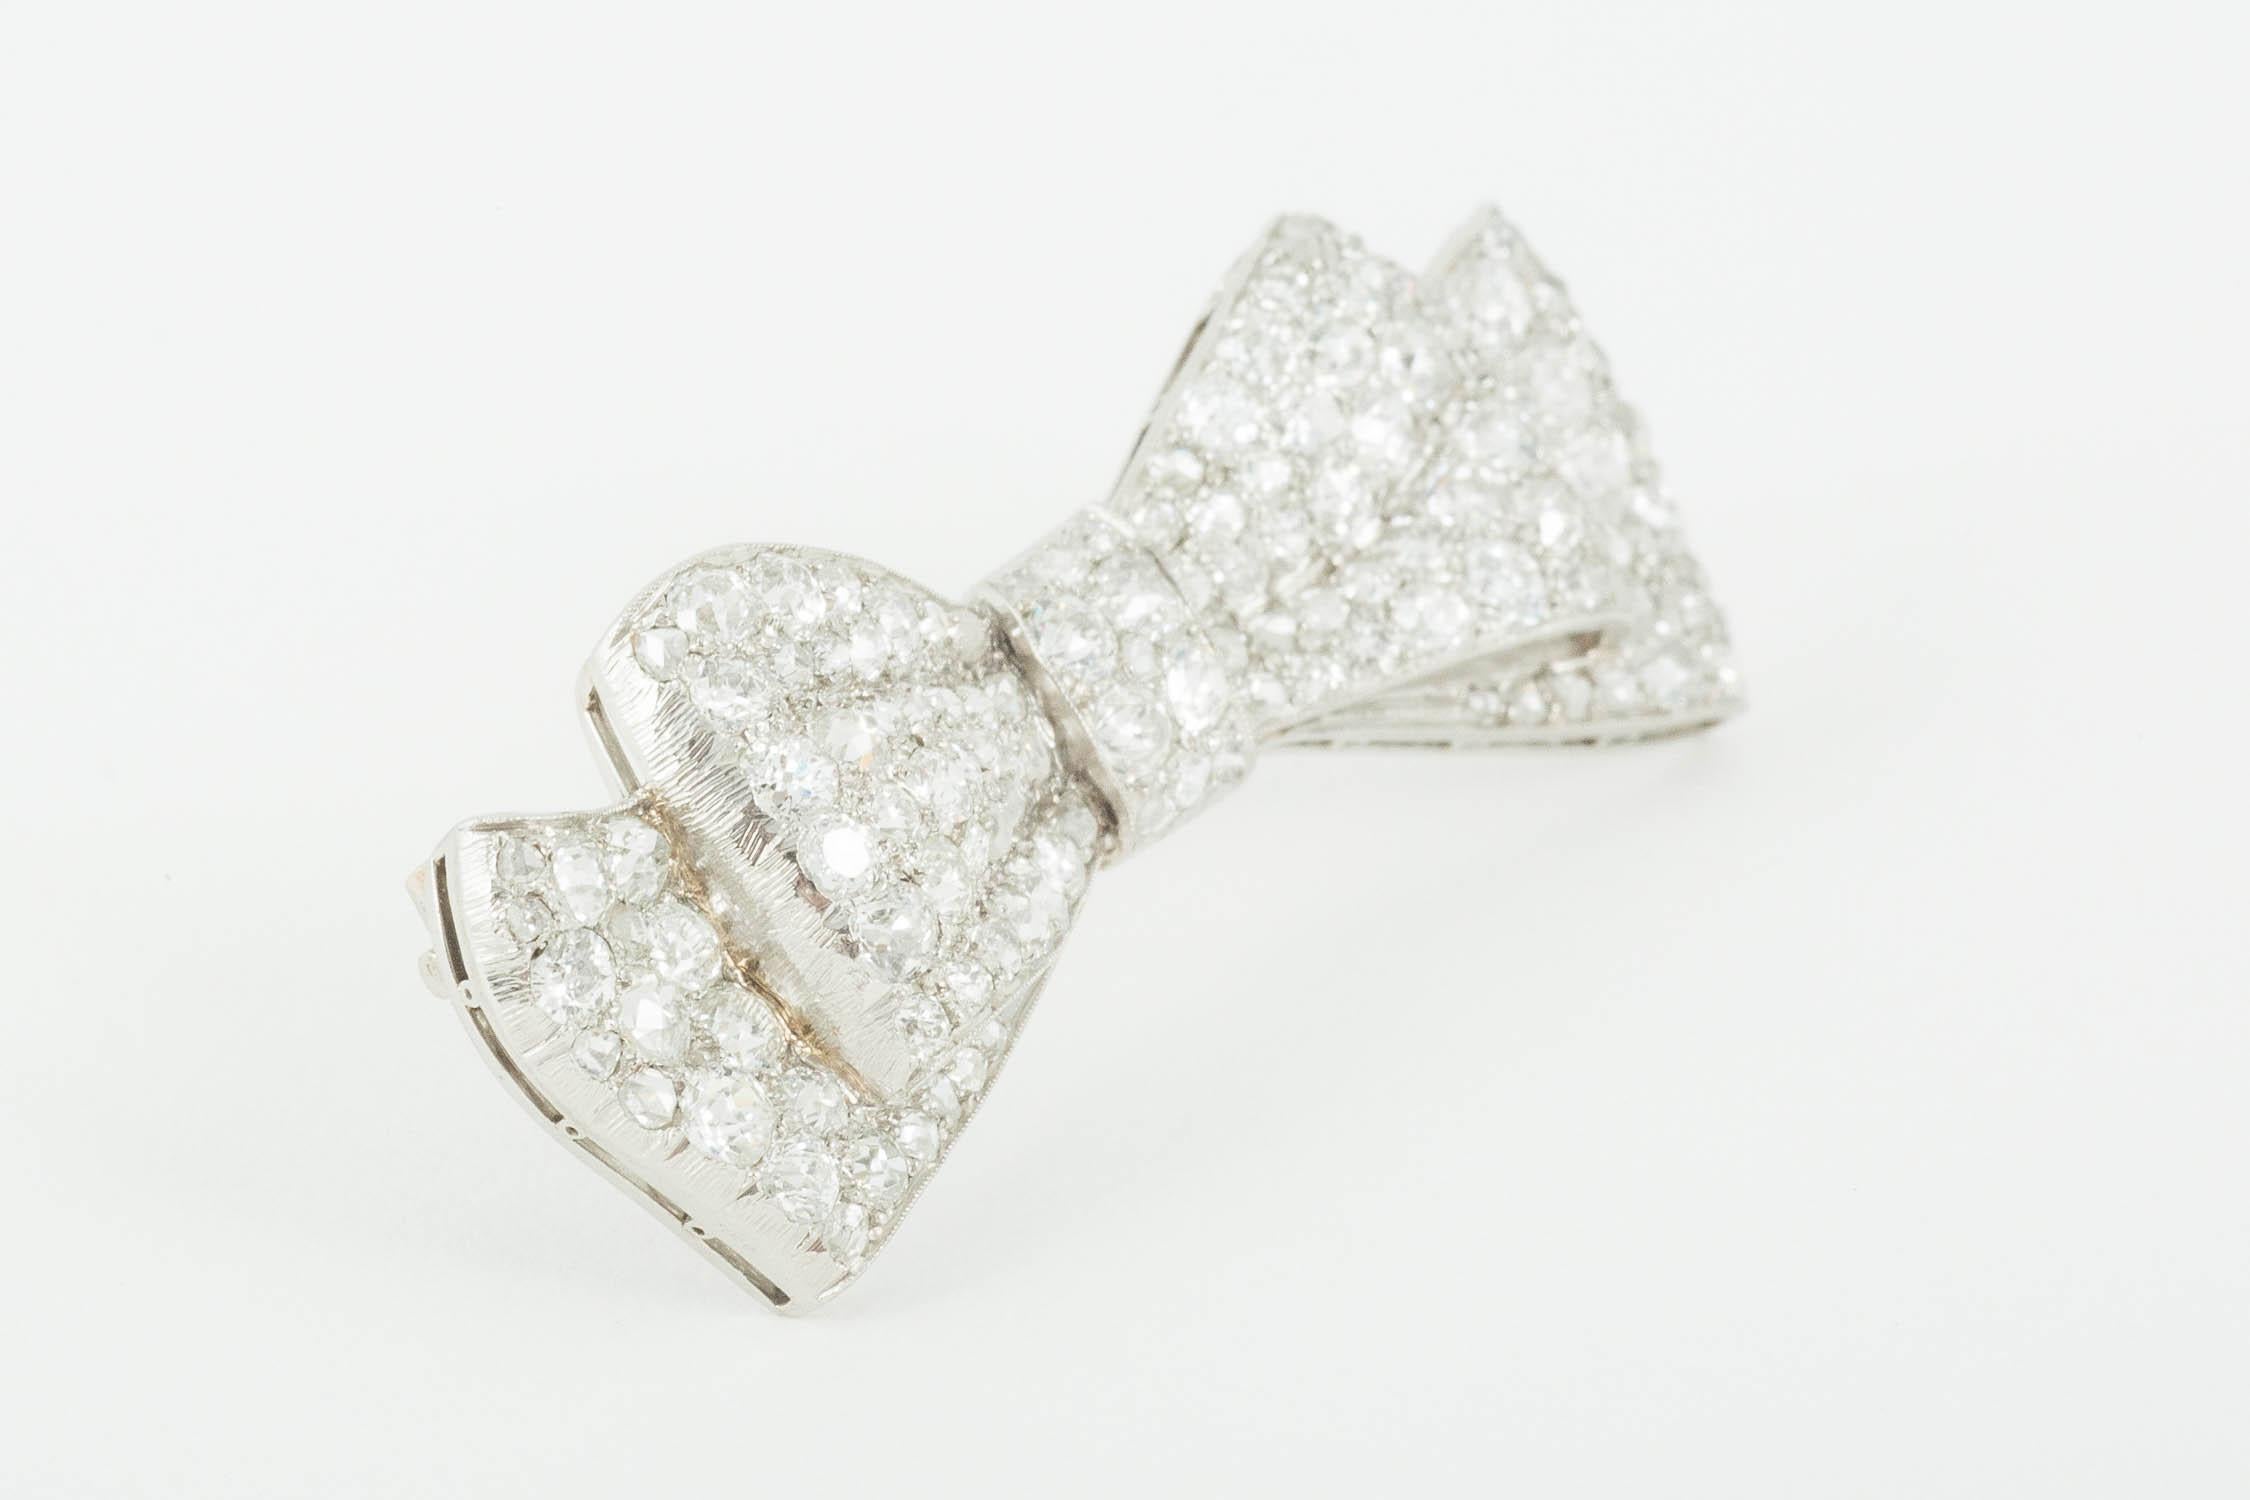 An Edwardian finely made platinum mounted bow brooch, pave set with brilliant and rose cut diamonds of approximately 6 carats. 
Width 45 mm x height 15 mm.
Antique piece (over 100 years old).
Early 20th century, English circa 1920. 

Stock no. 1756